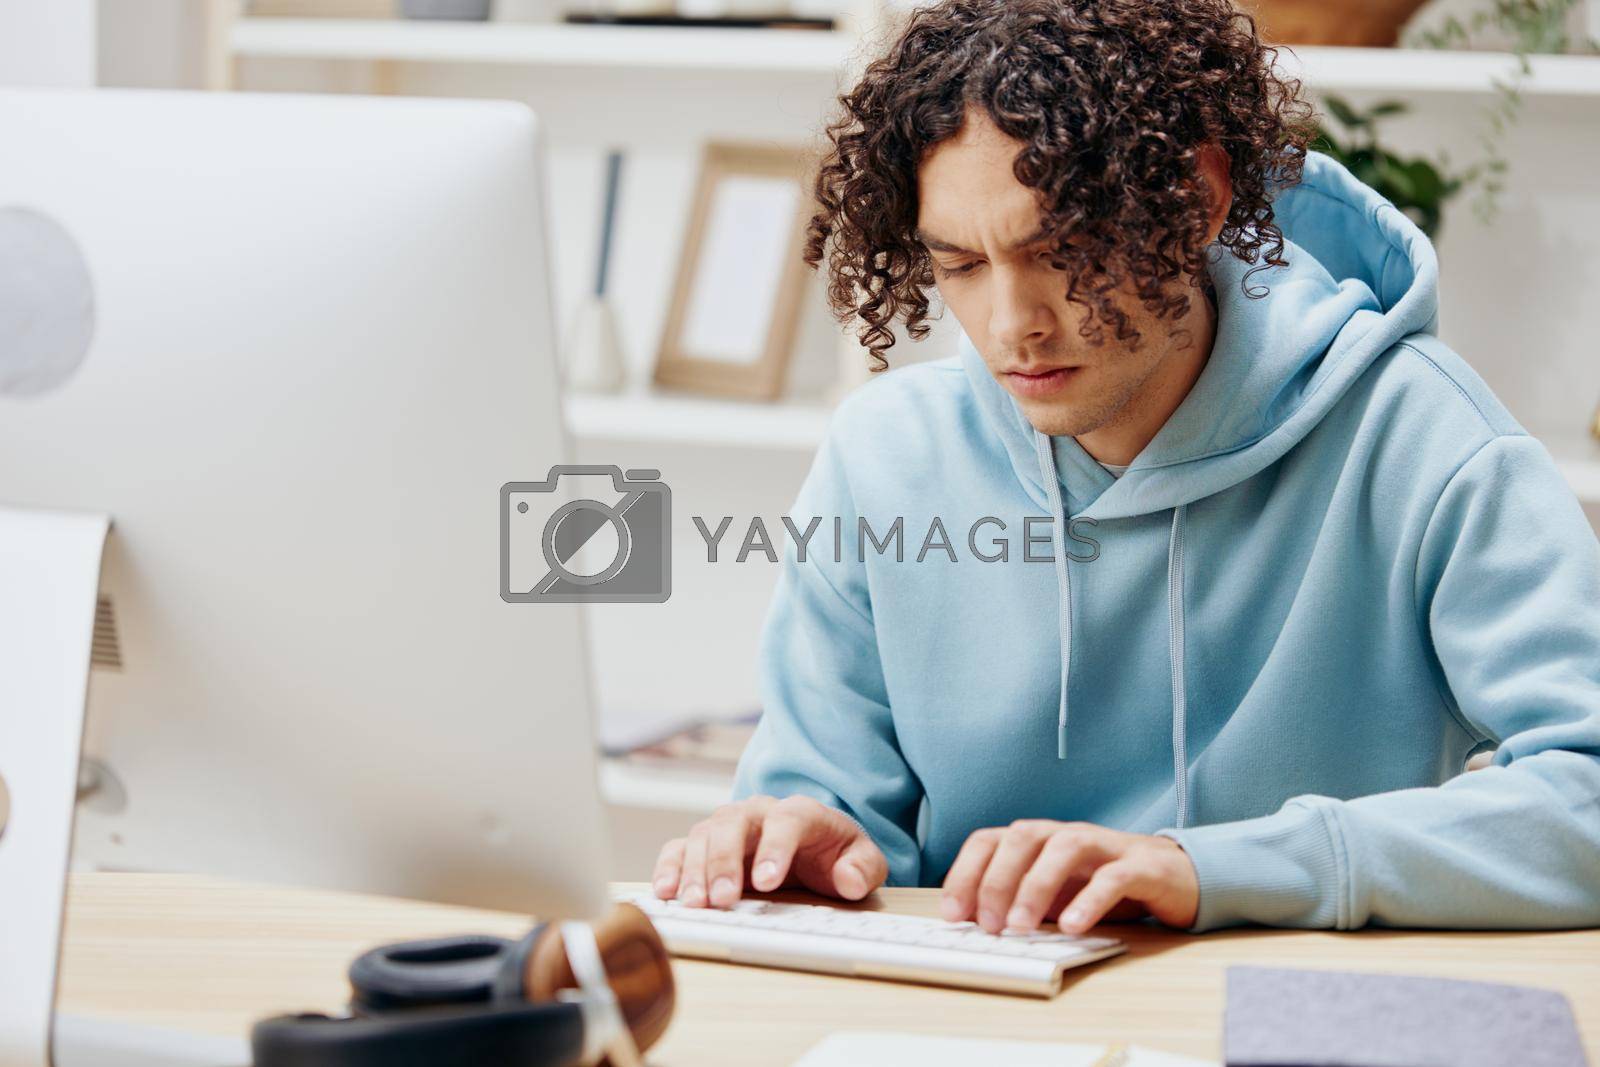 guy with curly hair in a blue jacket in front of a computer Lifestyle. High quality photo